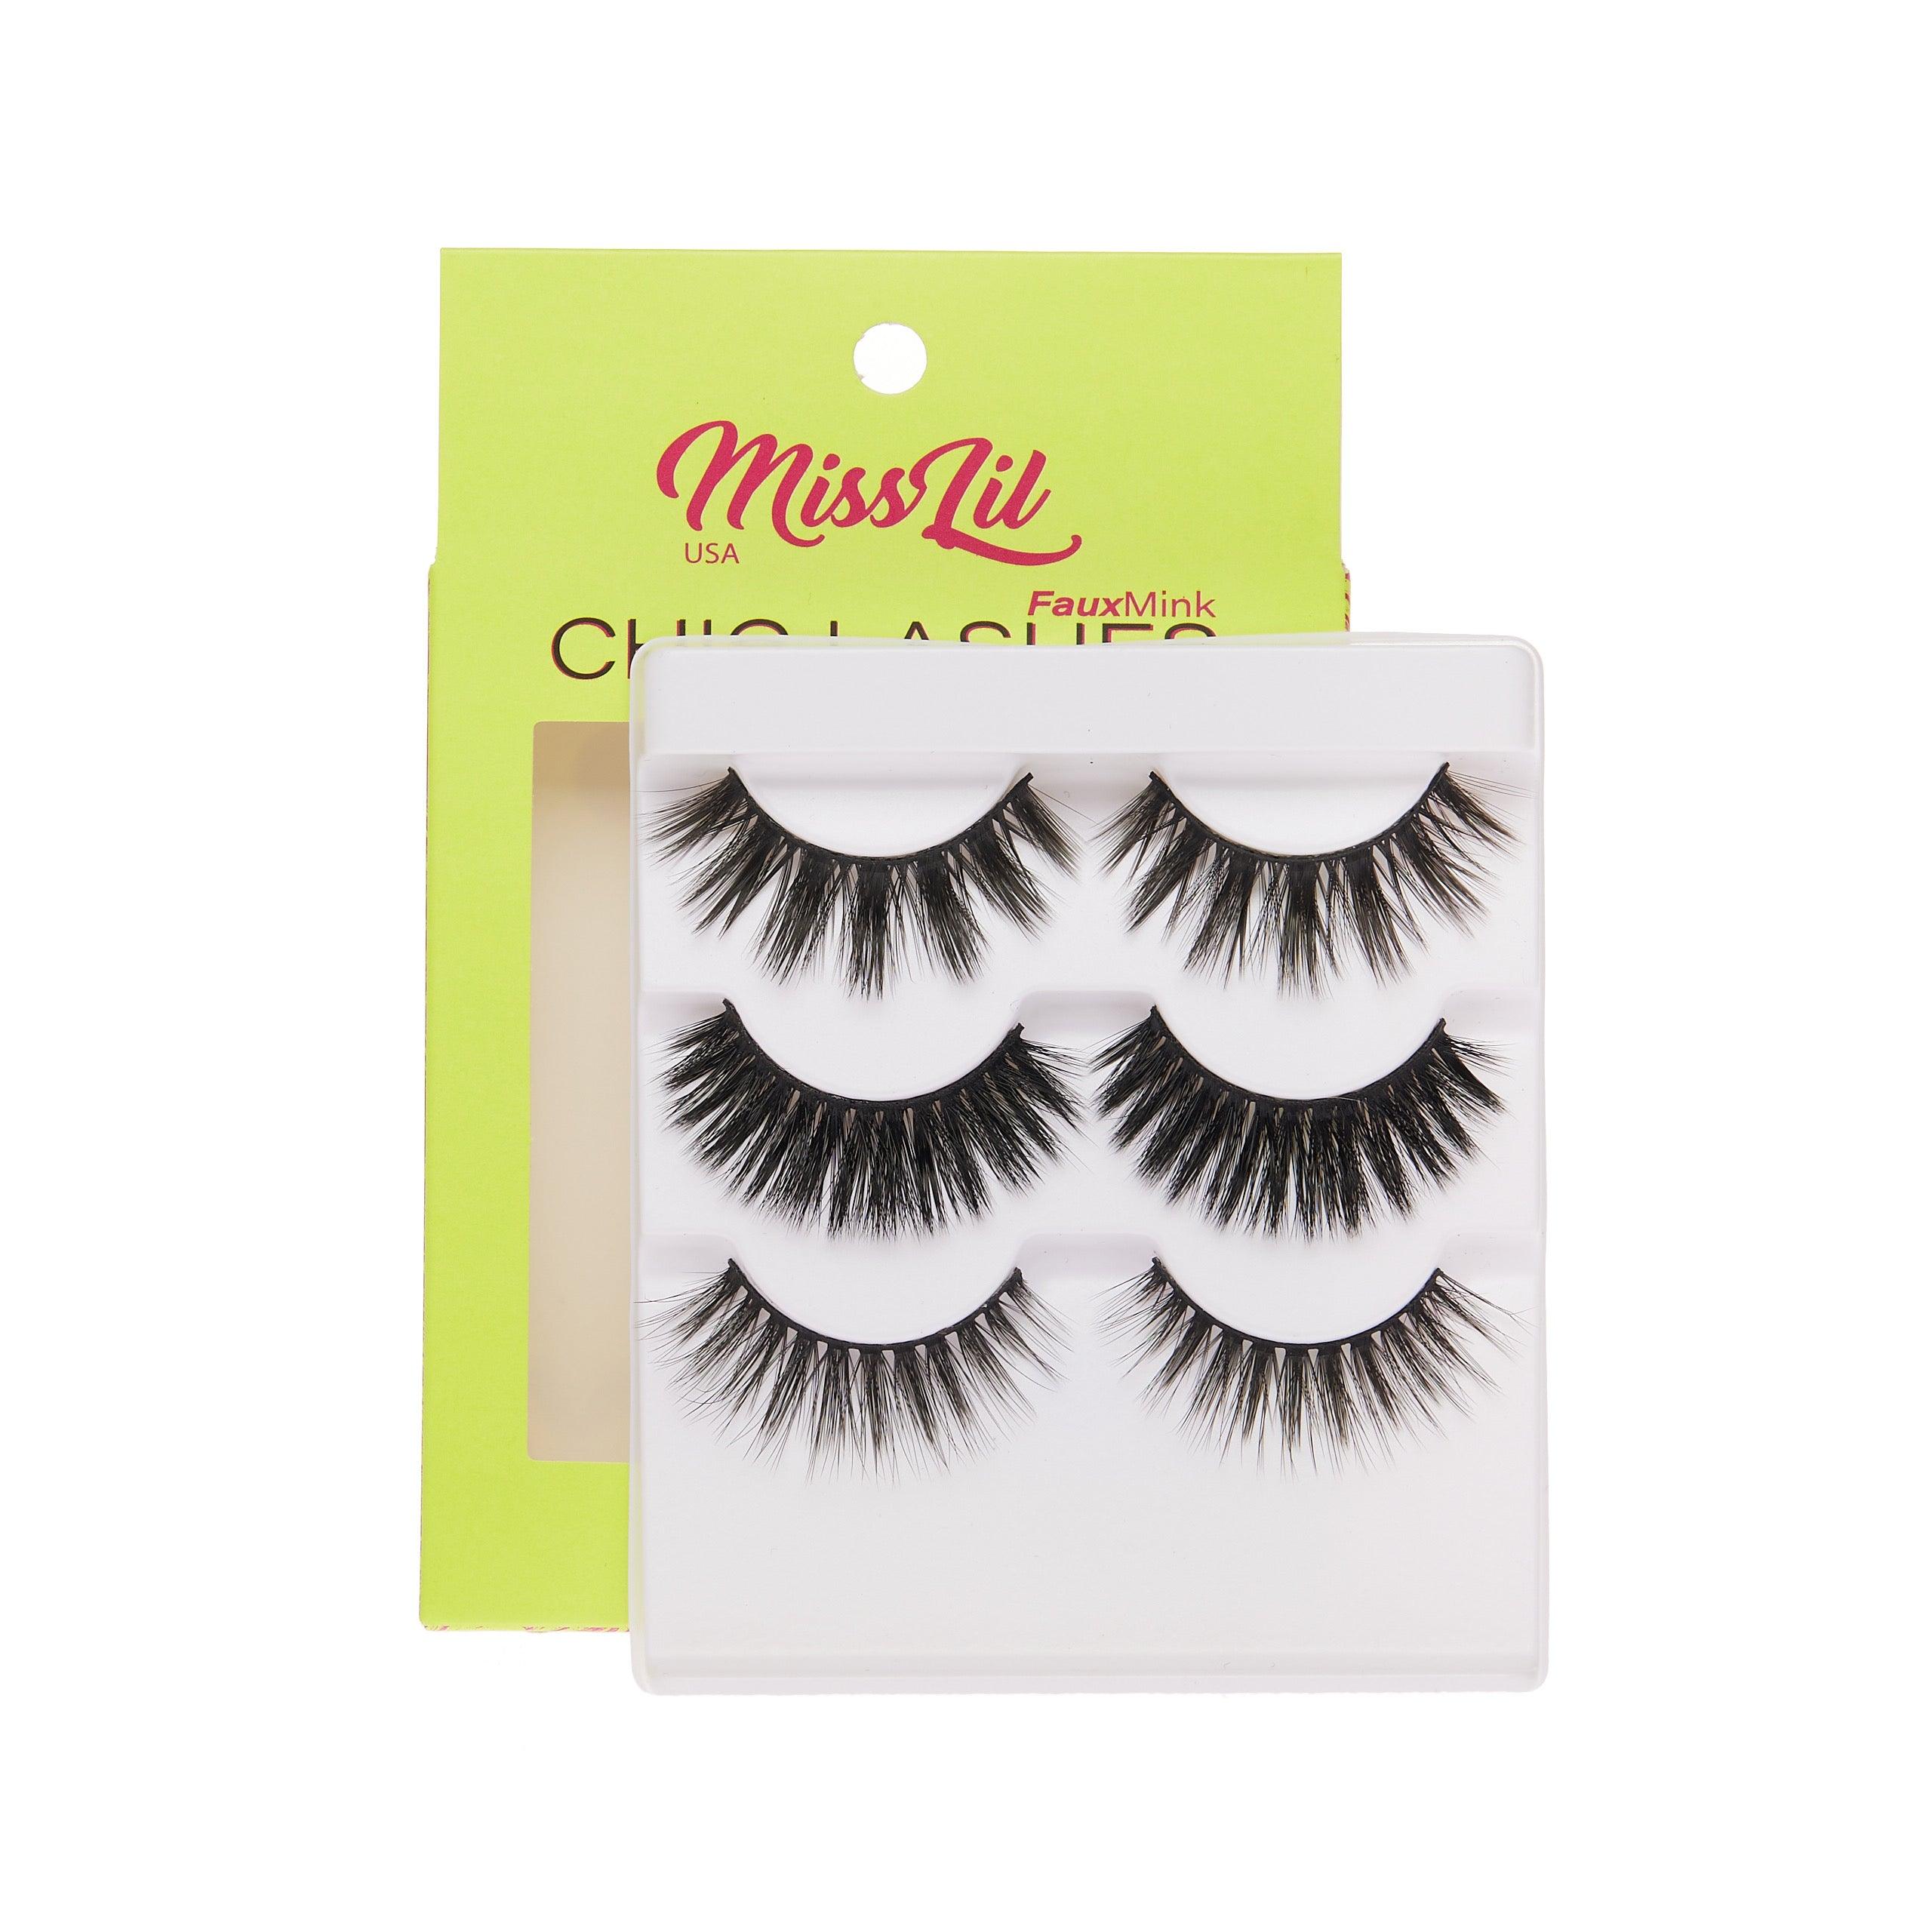 3-Pair Faux Mink Eyelashes - Chic Lashes Collection #27 - Pack of 3 - Miss Lil USA